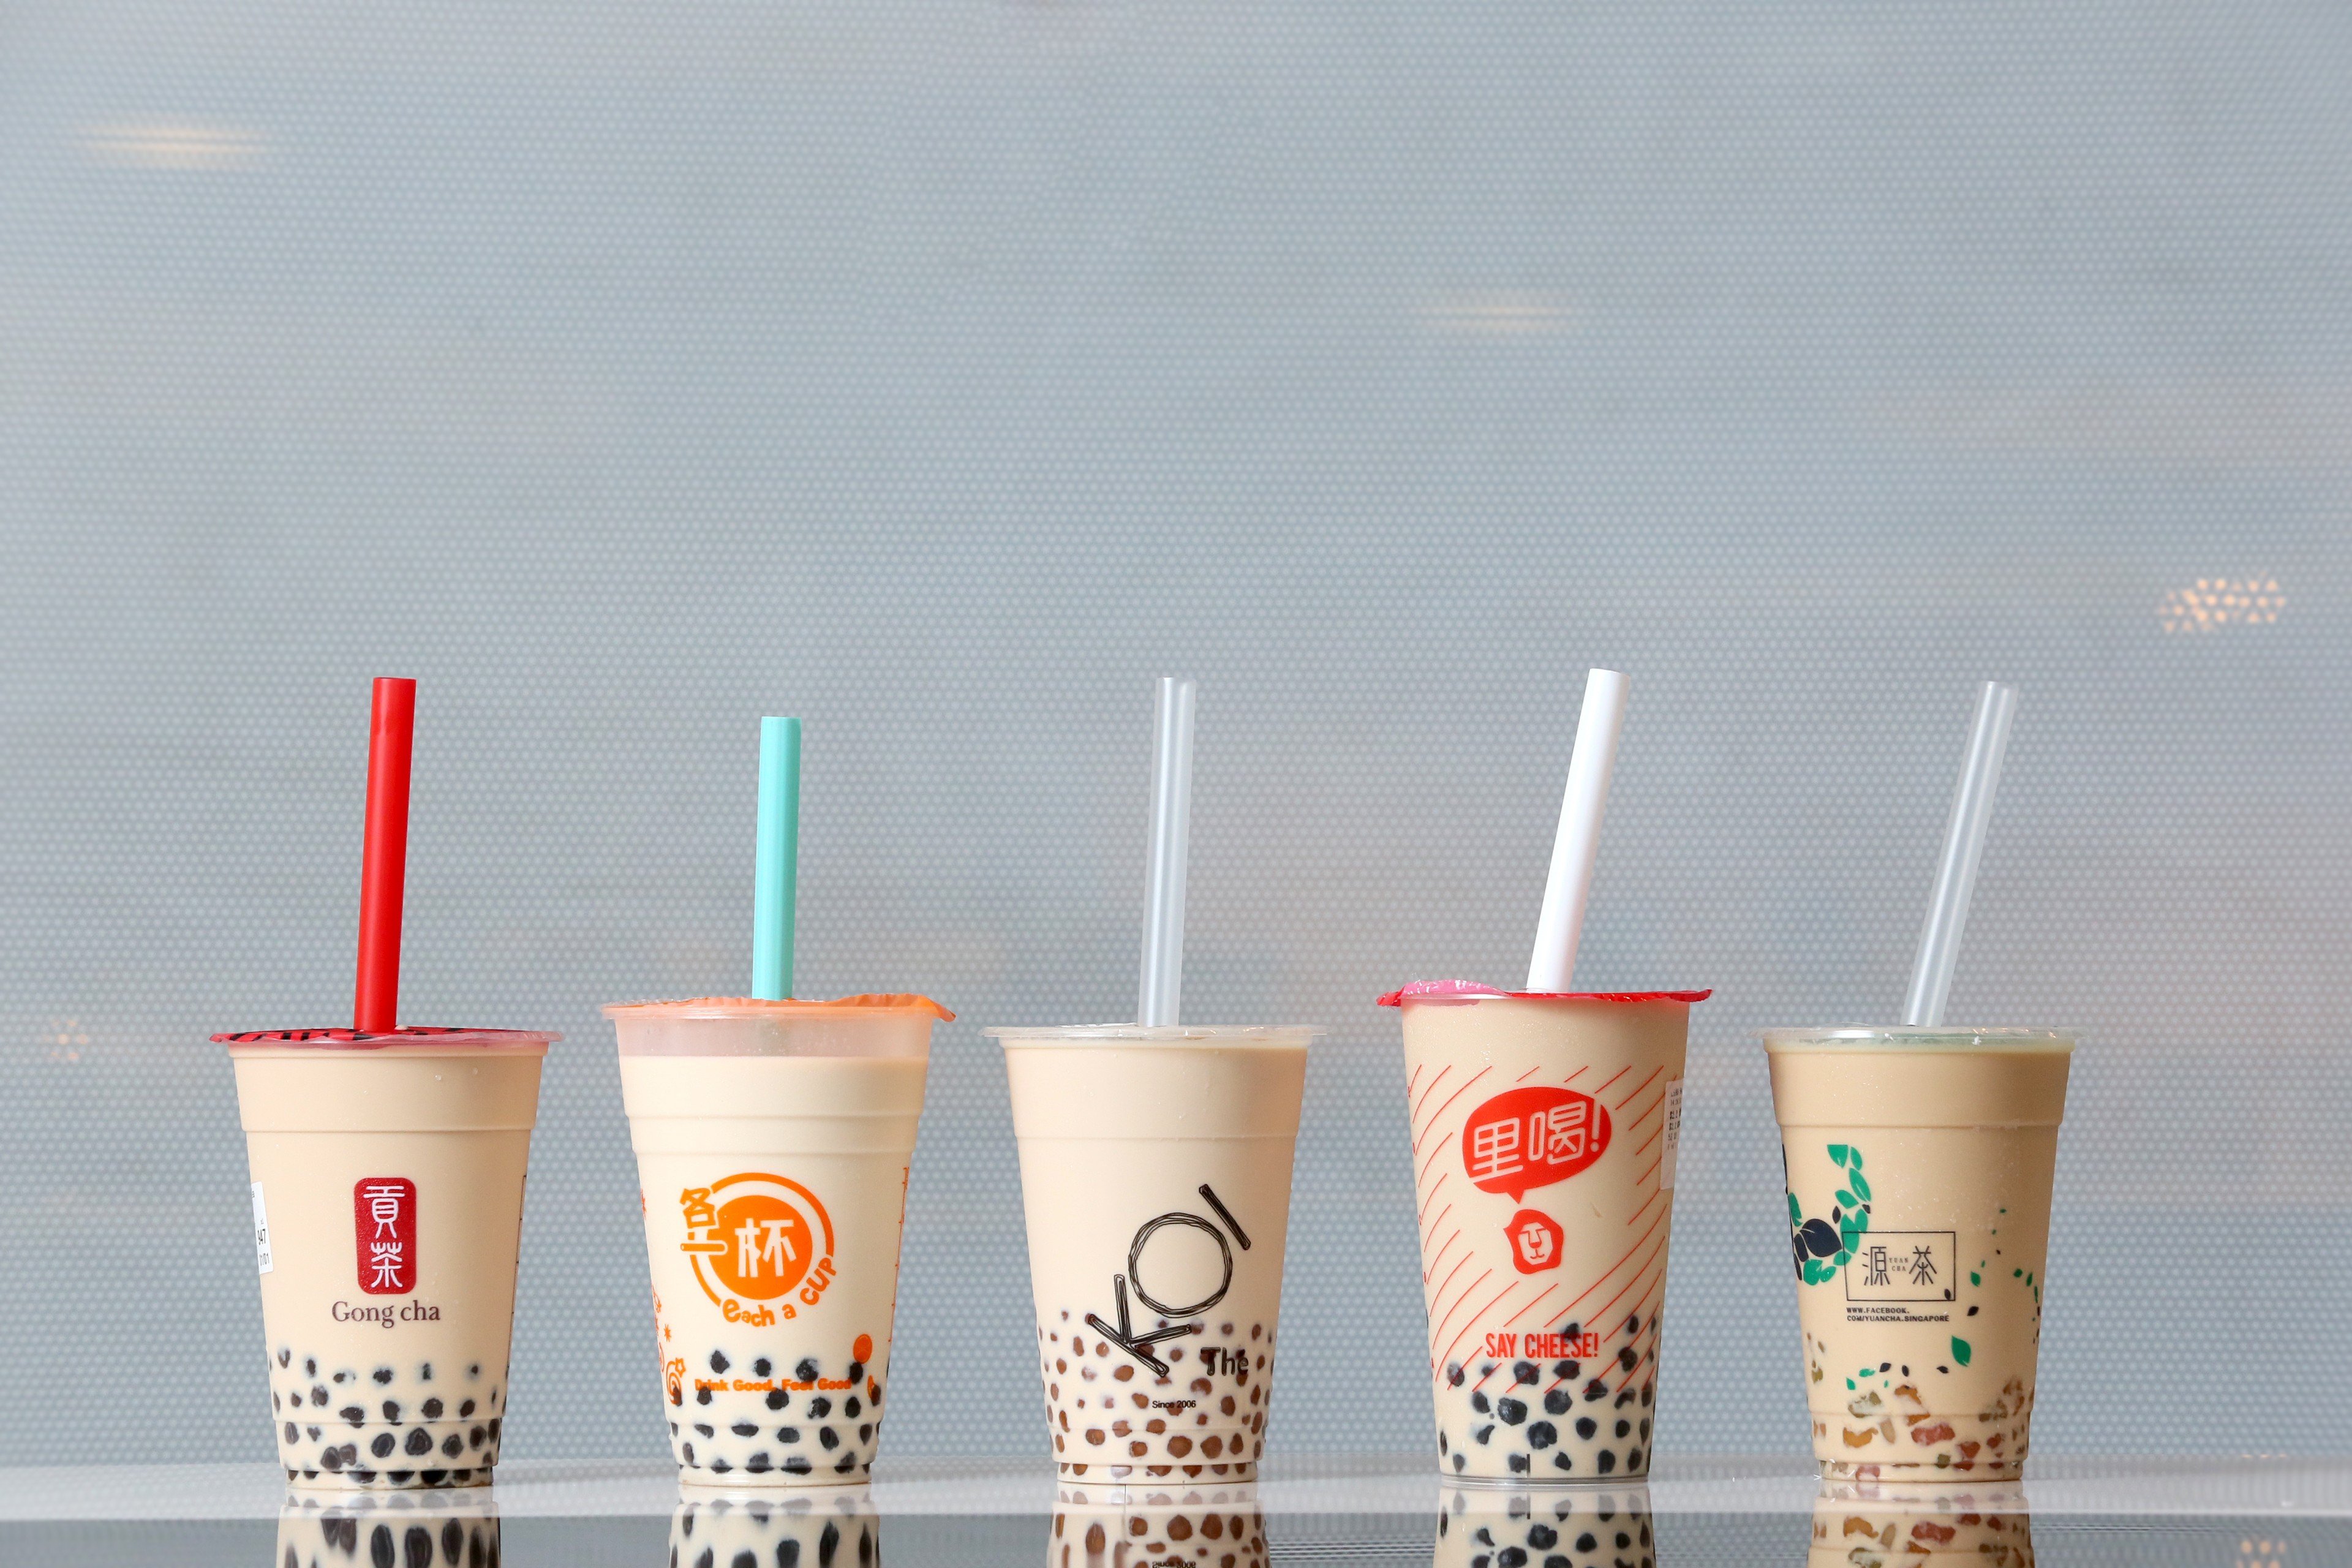 Drinking bubble tea regularly can increase the risk of developing chronic diseases, Singapore’s Mount Alvernia Hospital warns. Photo: Lianhe Zaobao